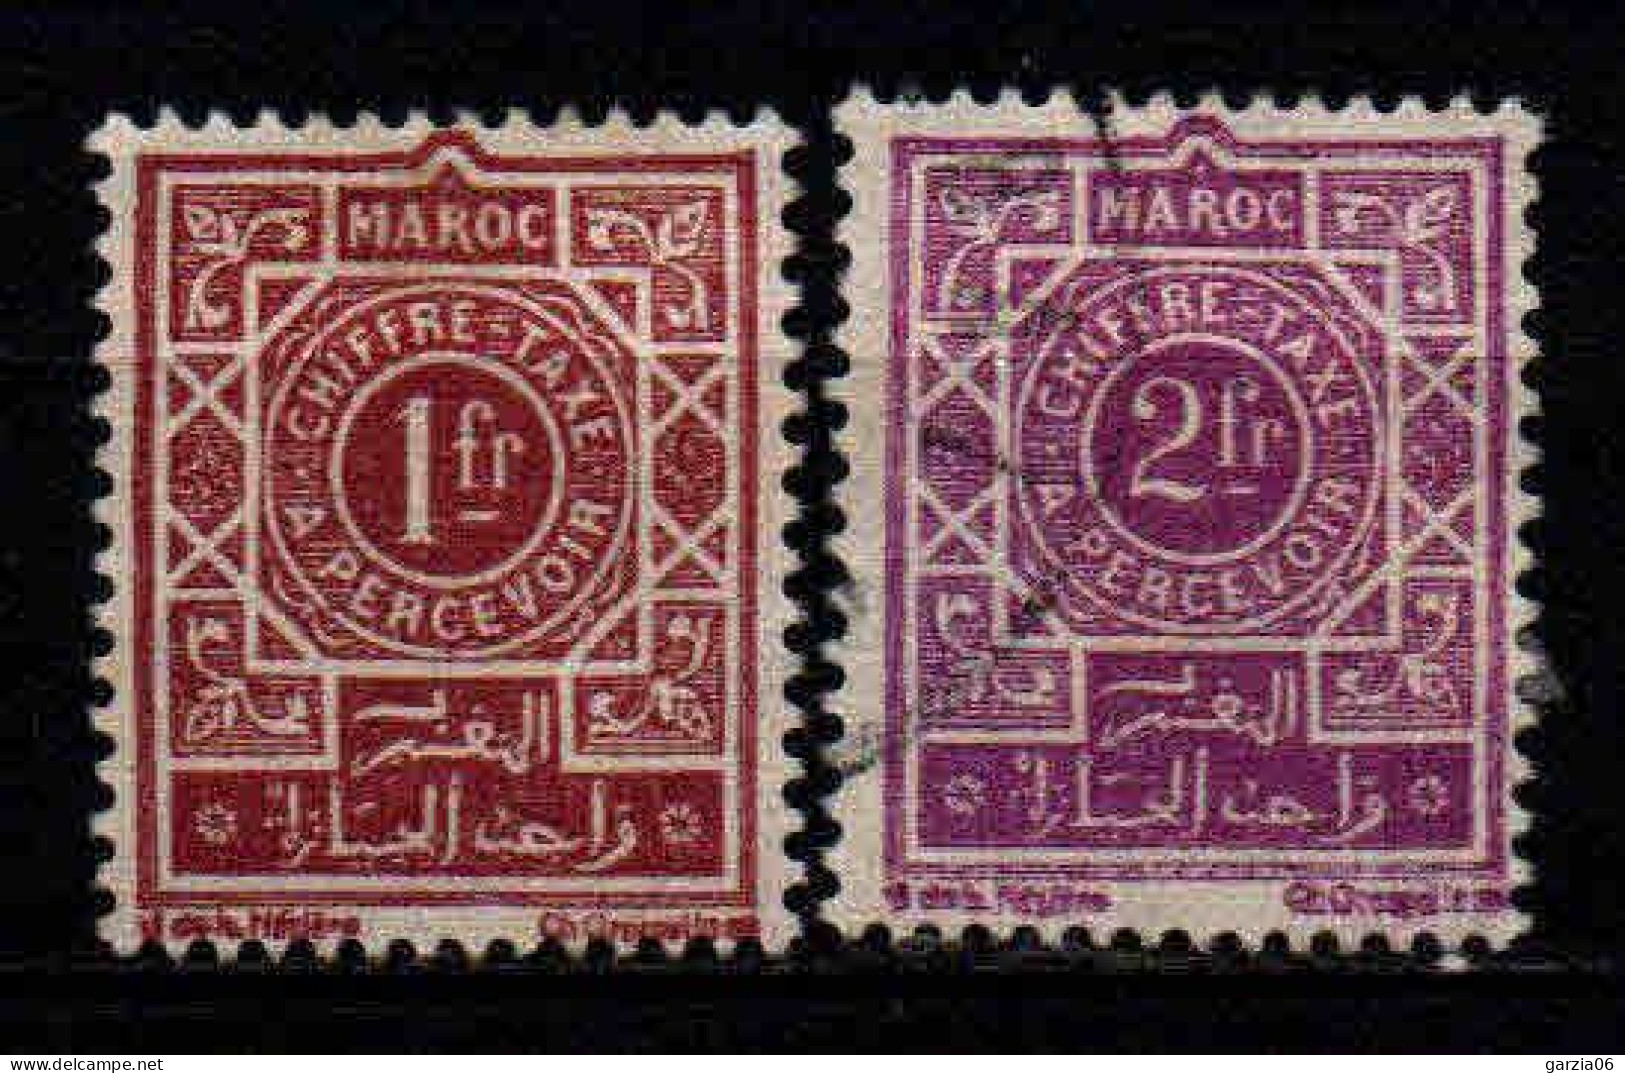 Maroc - 1947 - Timbres Taxe -  N° 53/54 - Oblit - Used - Postage Due